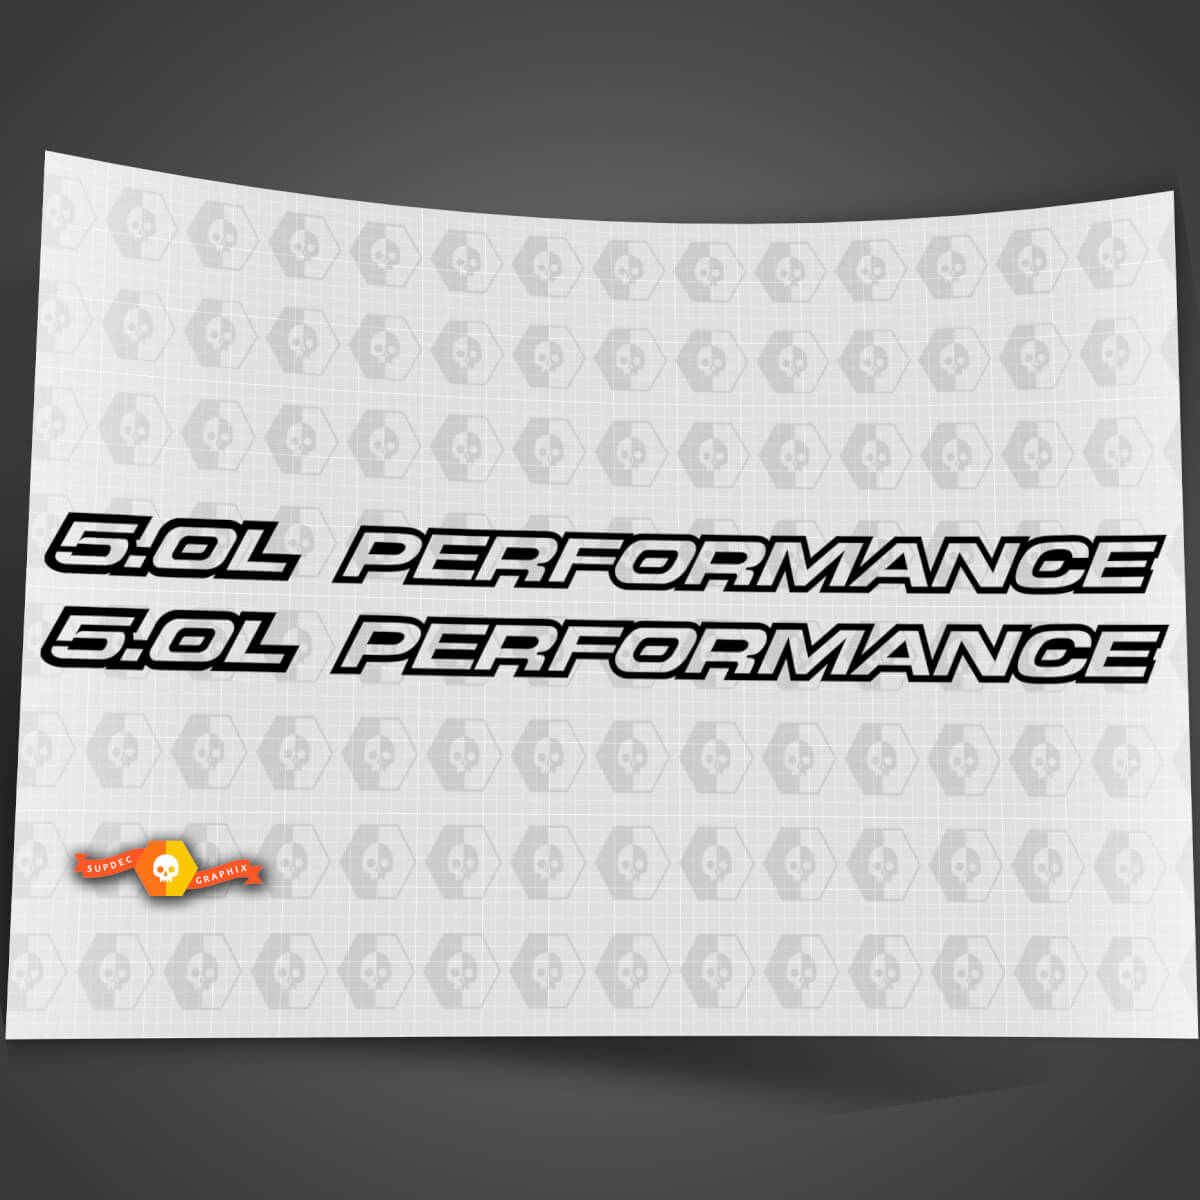 5.0L Performance Outline Series Fits Chevy 1500 Ford Mustang Vinyl Hood Decals